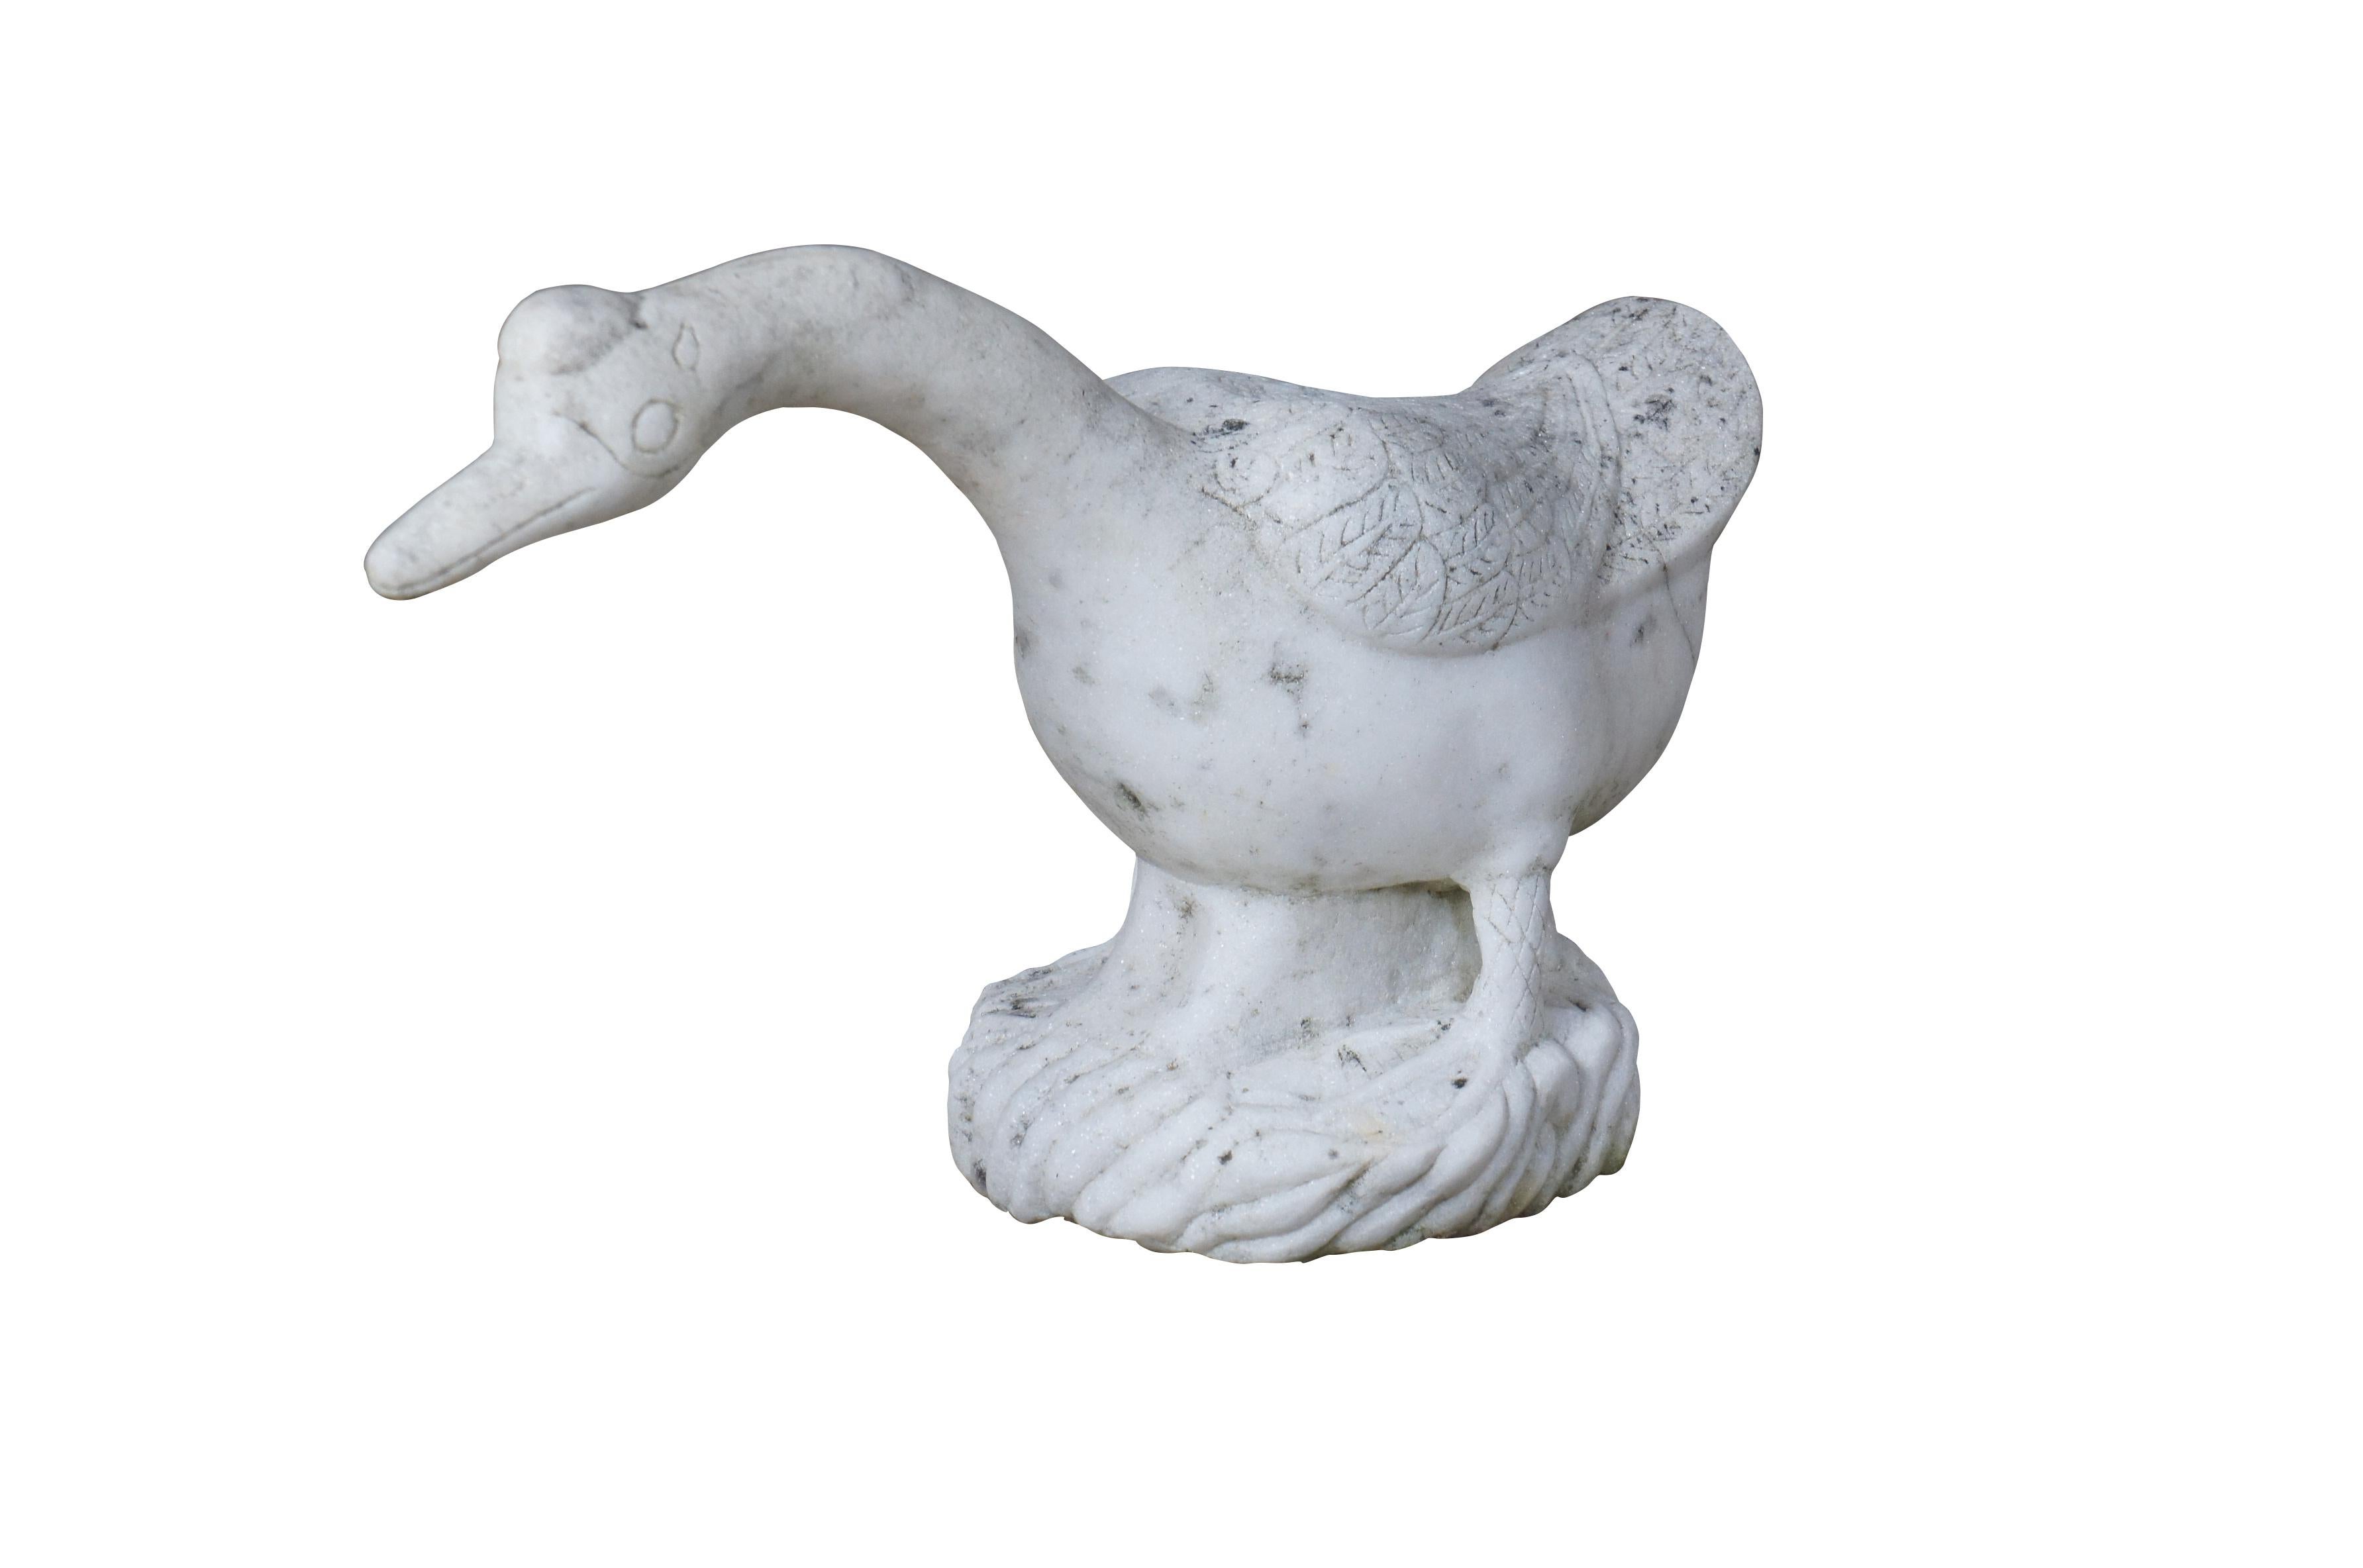 Heavy antique carved marble goose garden sculpture.  Made in Italy circa 1930s.

Dimensions:
23